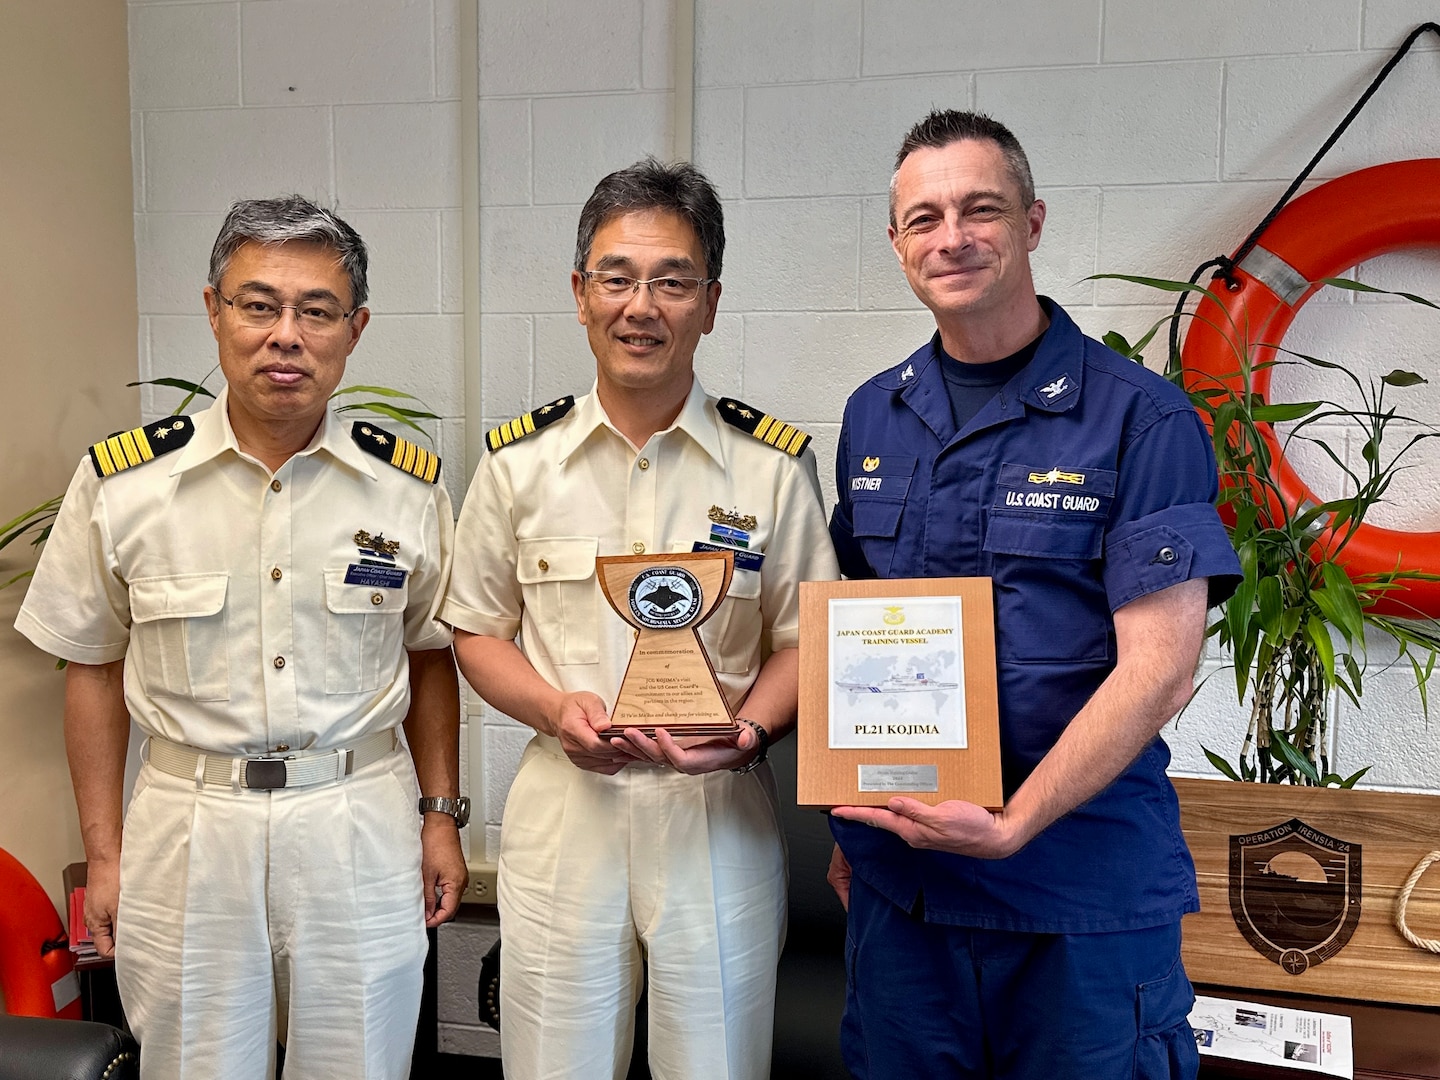 Capt. Robert Kistner, commander of U.S. Coast Guard Forces Micronesia Sector Guam, hosts Capt. Kazushi Sakae, Capt. Hayashi, and over 40 cadets from the Japanese Coast Guard training ship Kojima during their visit to Guam on June 12, 2024. The event marked a significant moment of international cooperation and camaraderie between the two maritime services. (U.S. Coast Guard photo by Chief Warrant Officer Sara Muir)